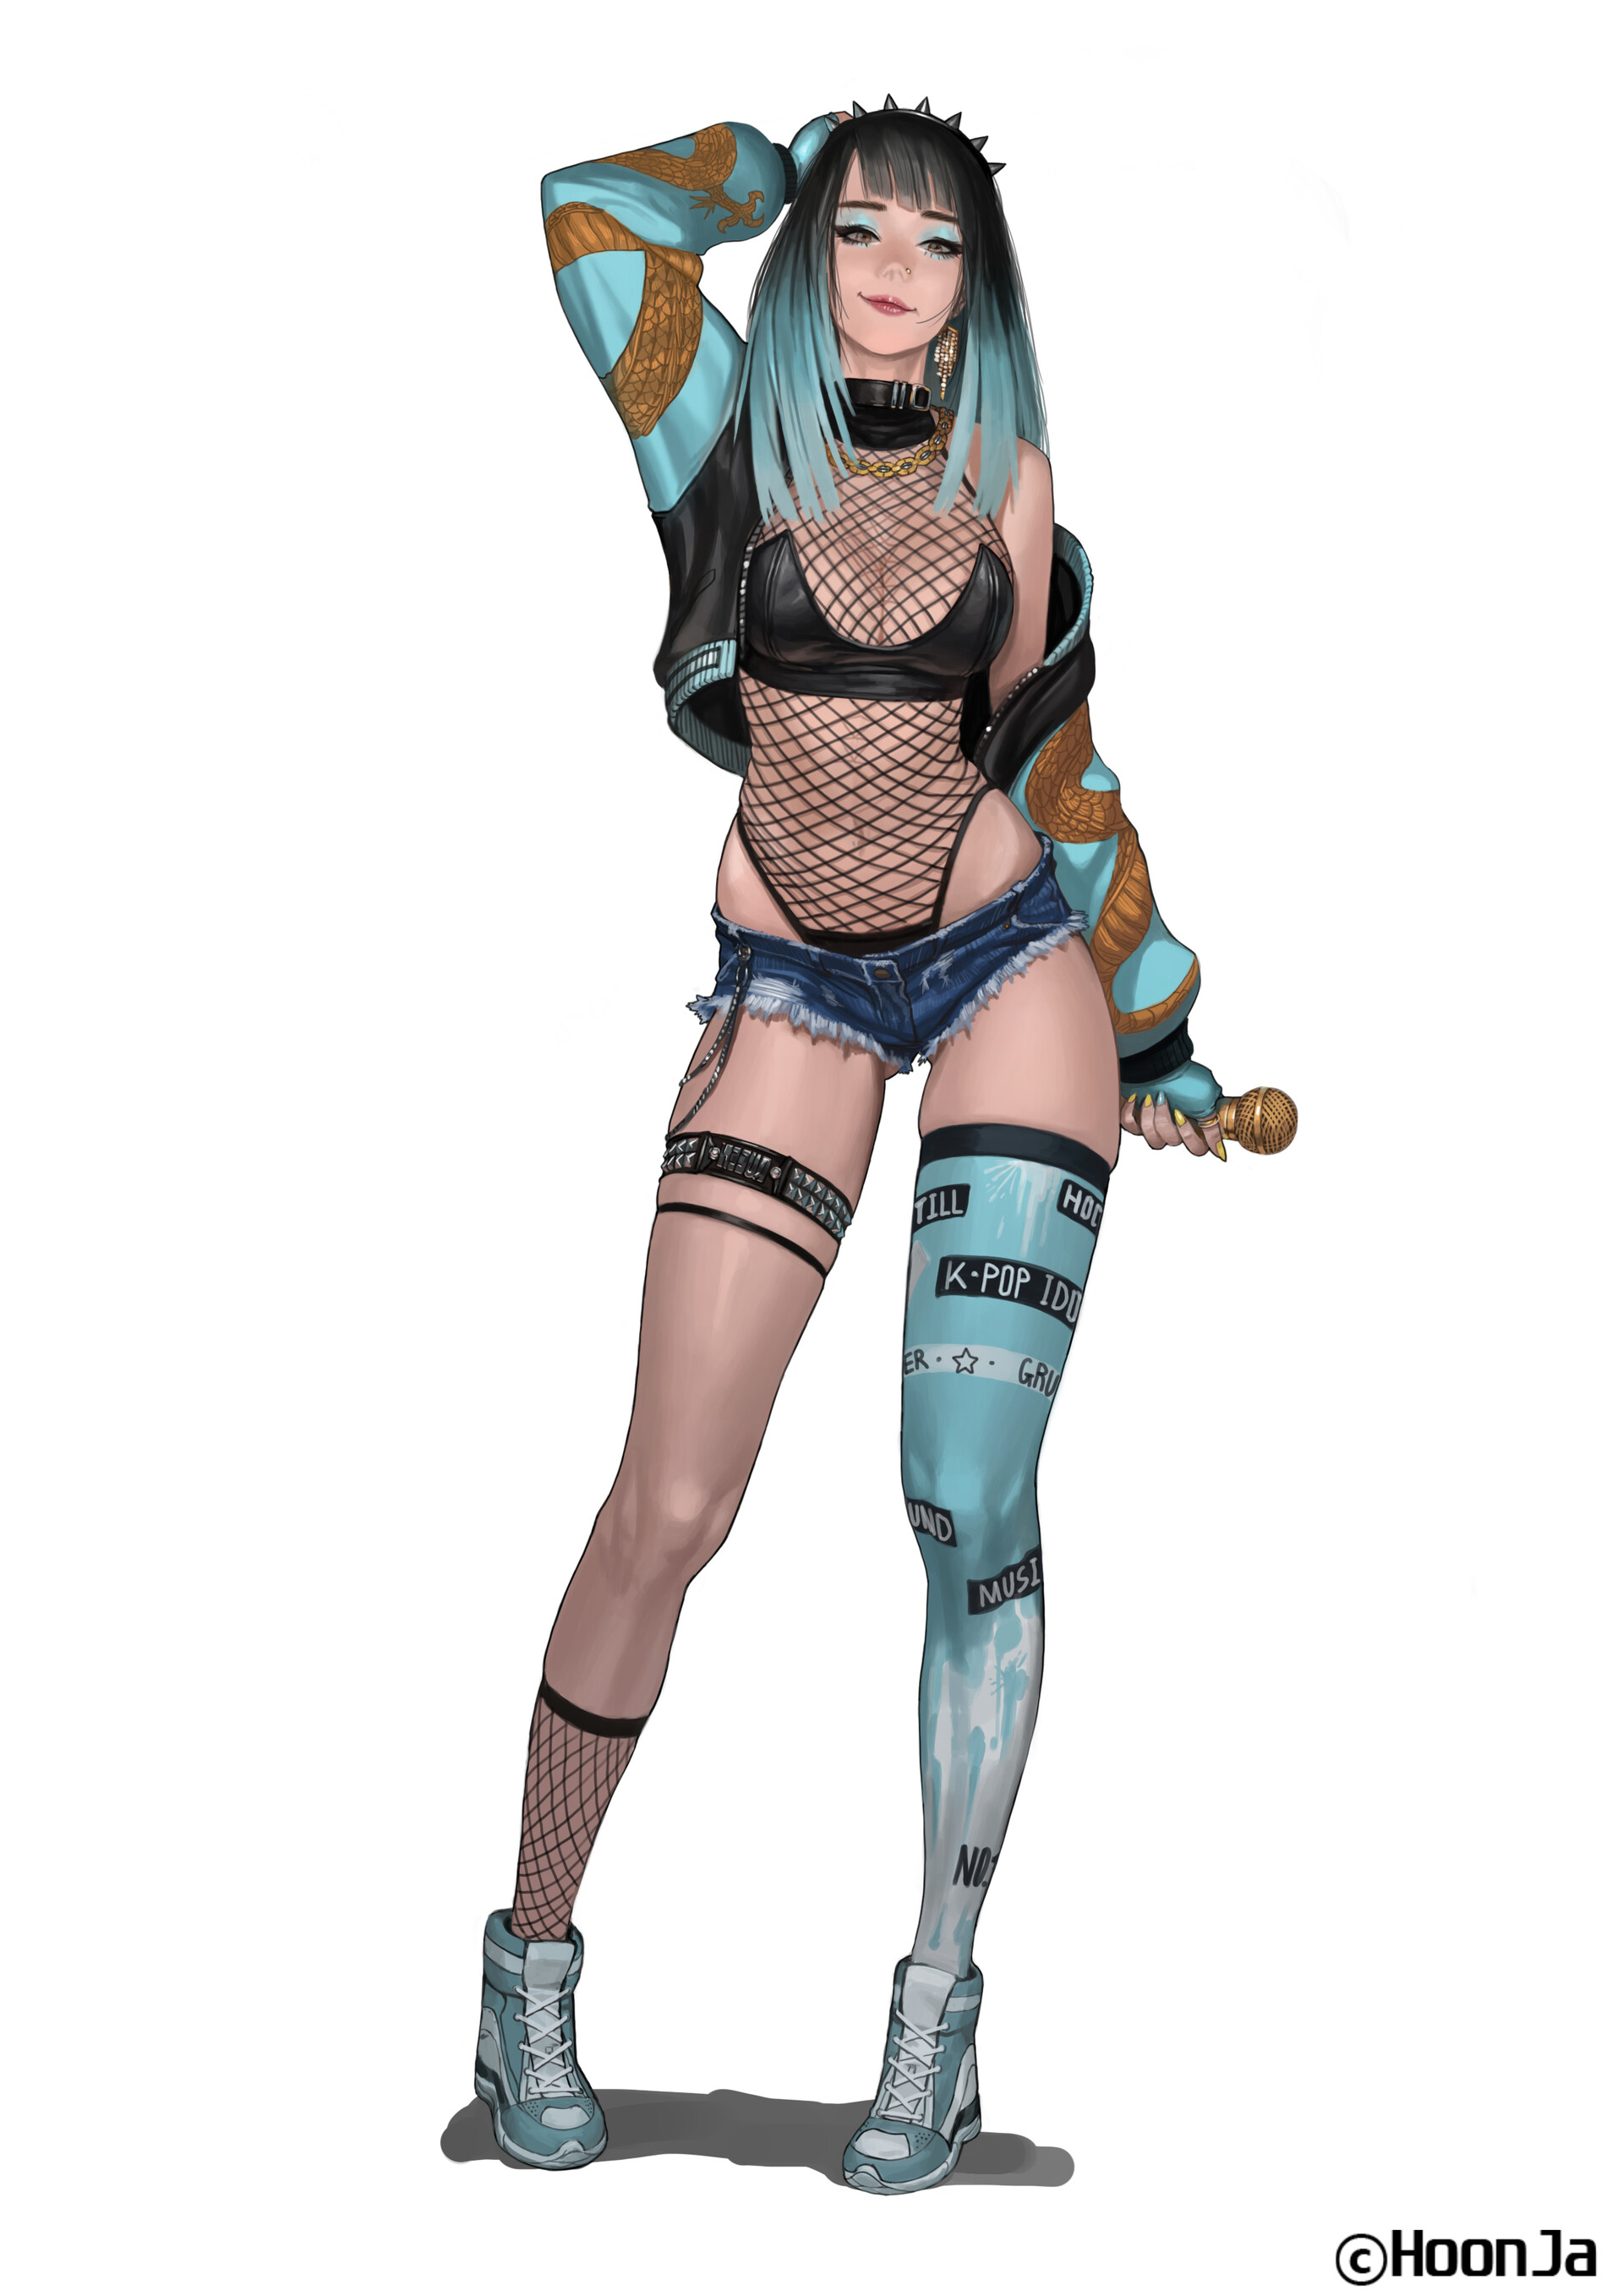 General 1920x2716 portrait display original characters drawing simple background frontal view hips missing sock